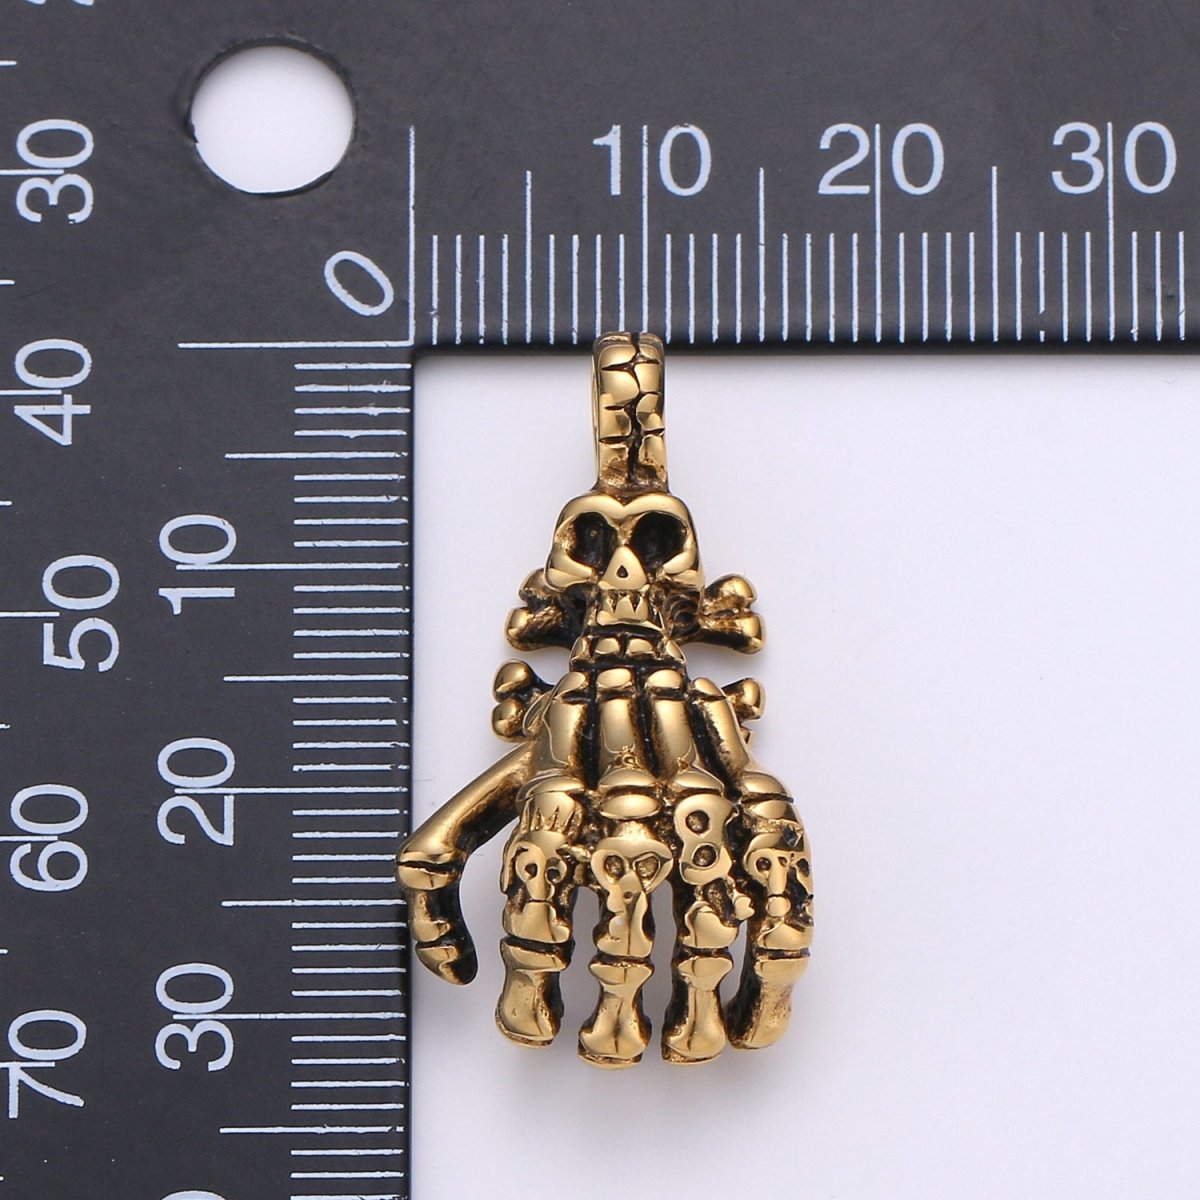 Gold Skeleton Hand Charm Zombie Hand Charm Silver Halloween Charm Tibetan Silver Charms For Men Jewelry Making in Stailness Steel Finding J-793~J-795 - DLUXCA